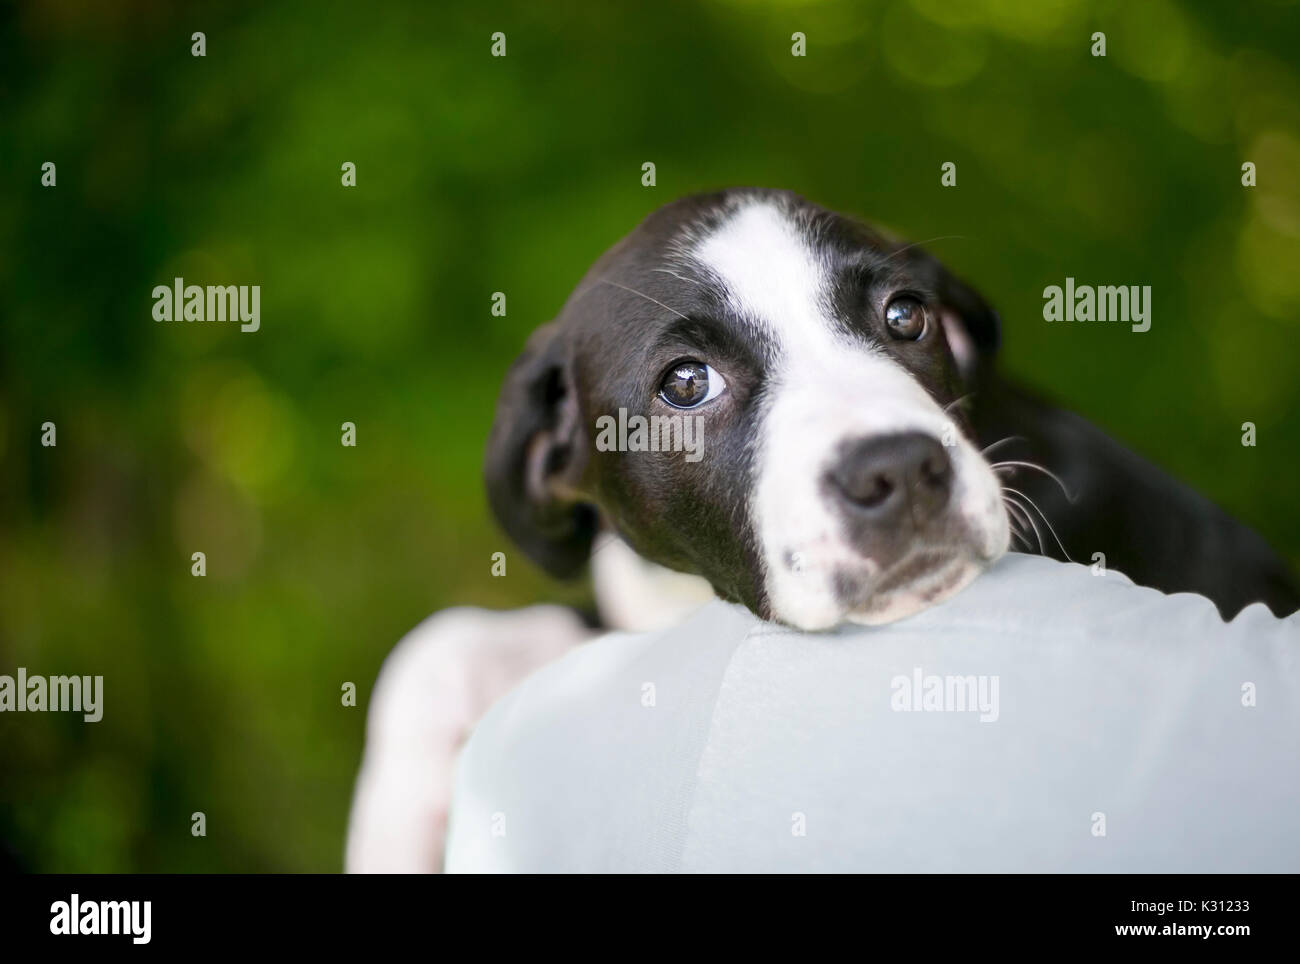 A black and white puppy with a sad expression, looking over a person's shoulder Stock Photo